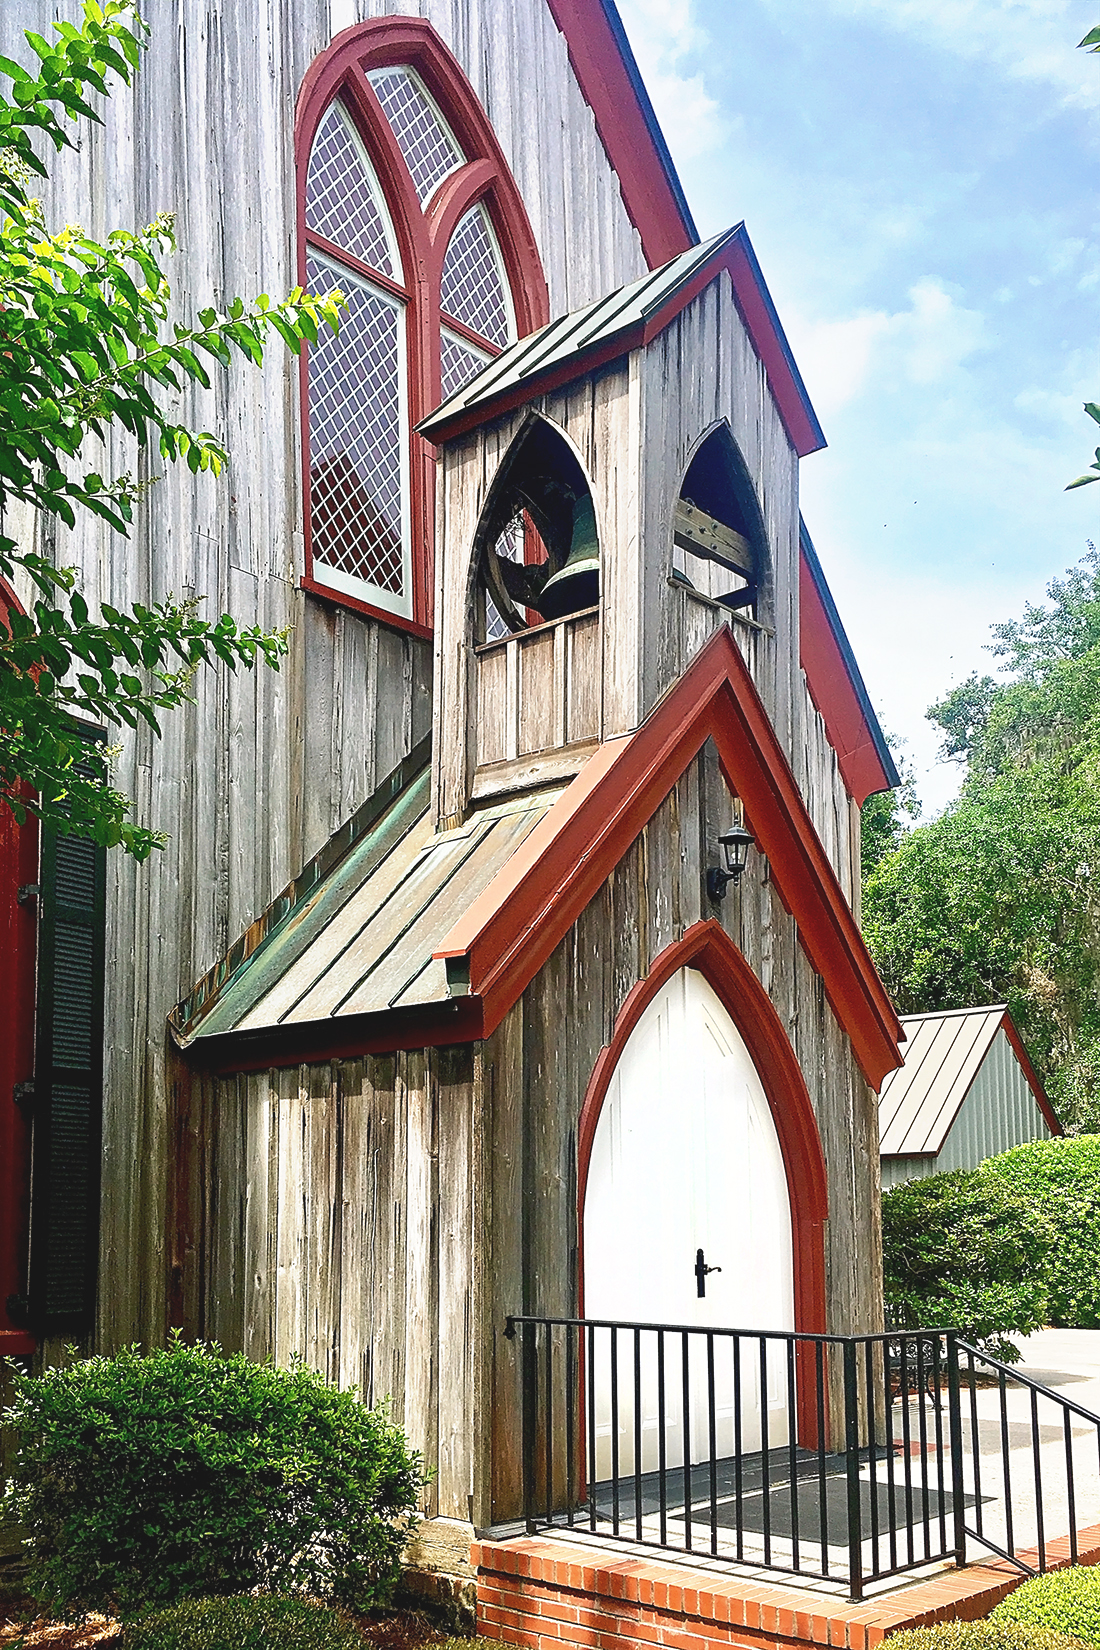 If you're looking for things to do in Bluffton SC, definitely take a stroll down to the Church of the Cross in historic Old Town Bluffton. It sits on the edge of the May River and the views are absolutely beautiful!